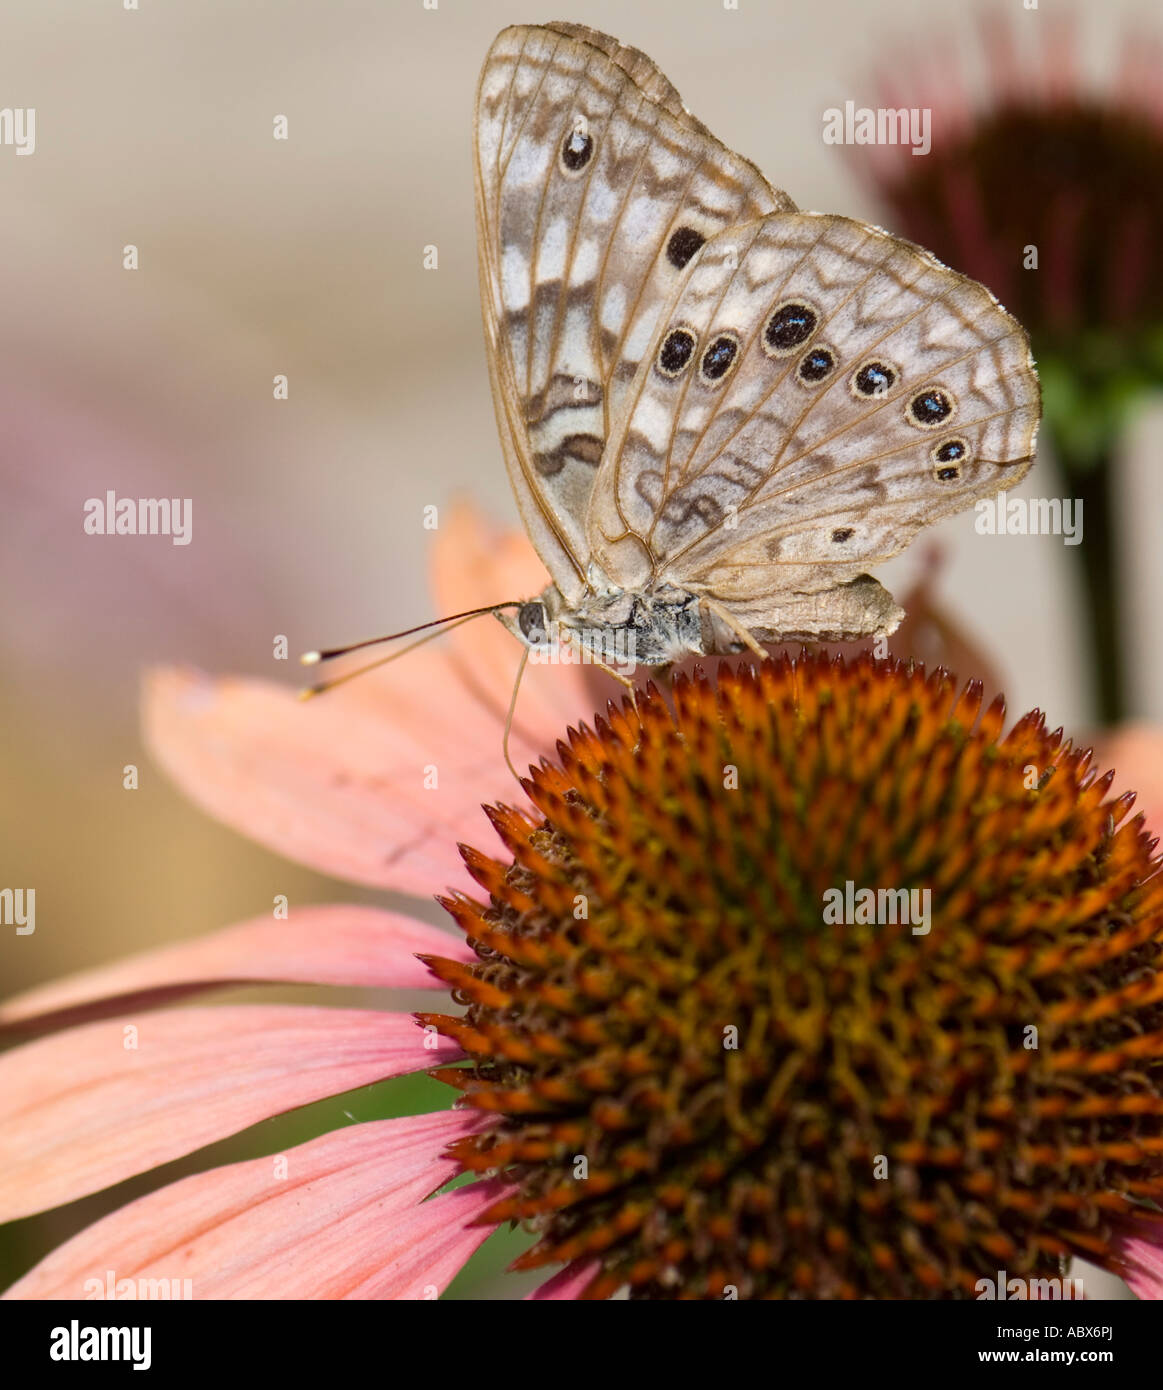 Hackberry Emperor Butterfly, Asterocampa celtis, on a Coneflower, echinacea. Oklahoma, USA. Stock Photo